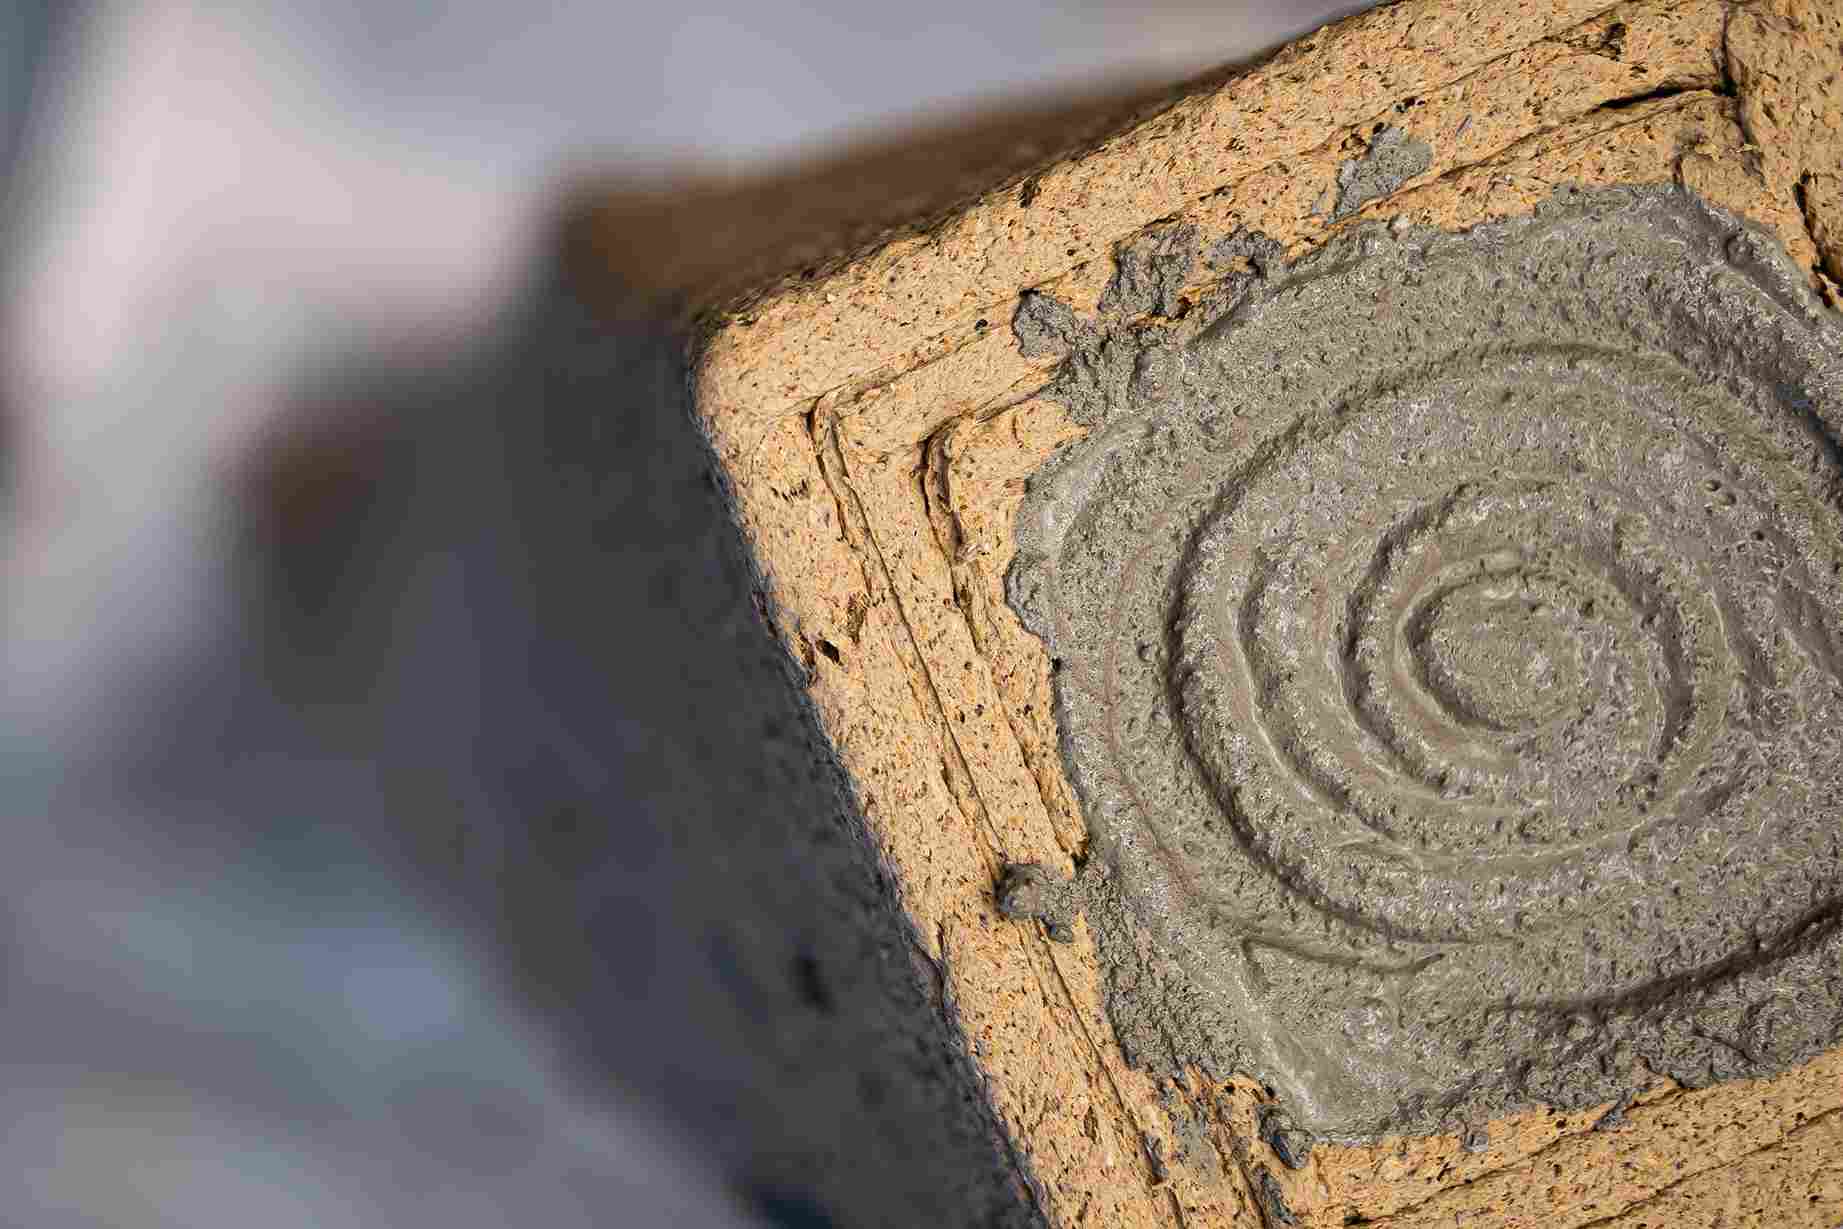 Wet concrete inside of a sawdust based form.